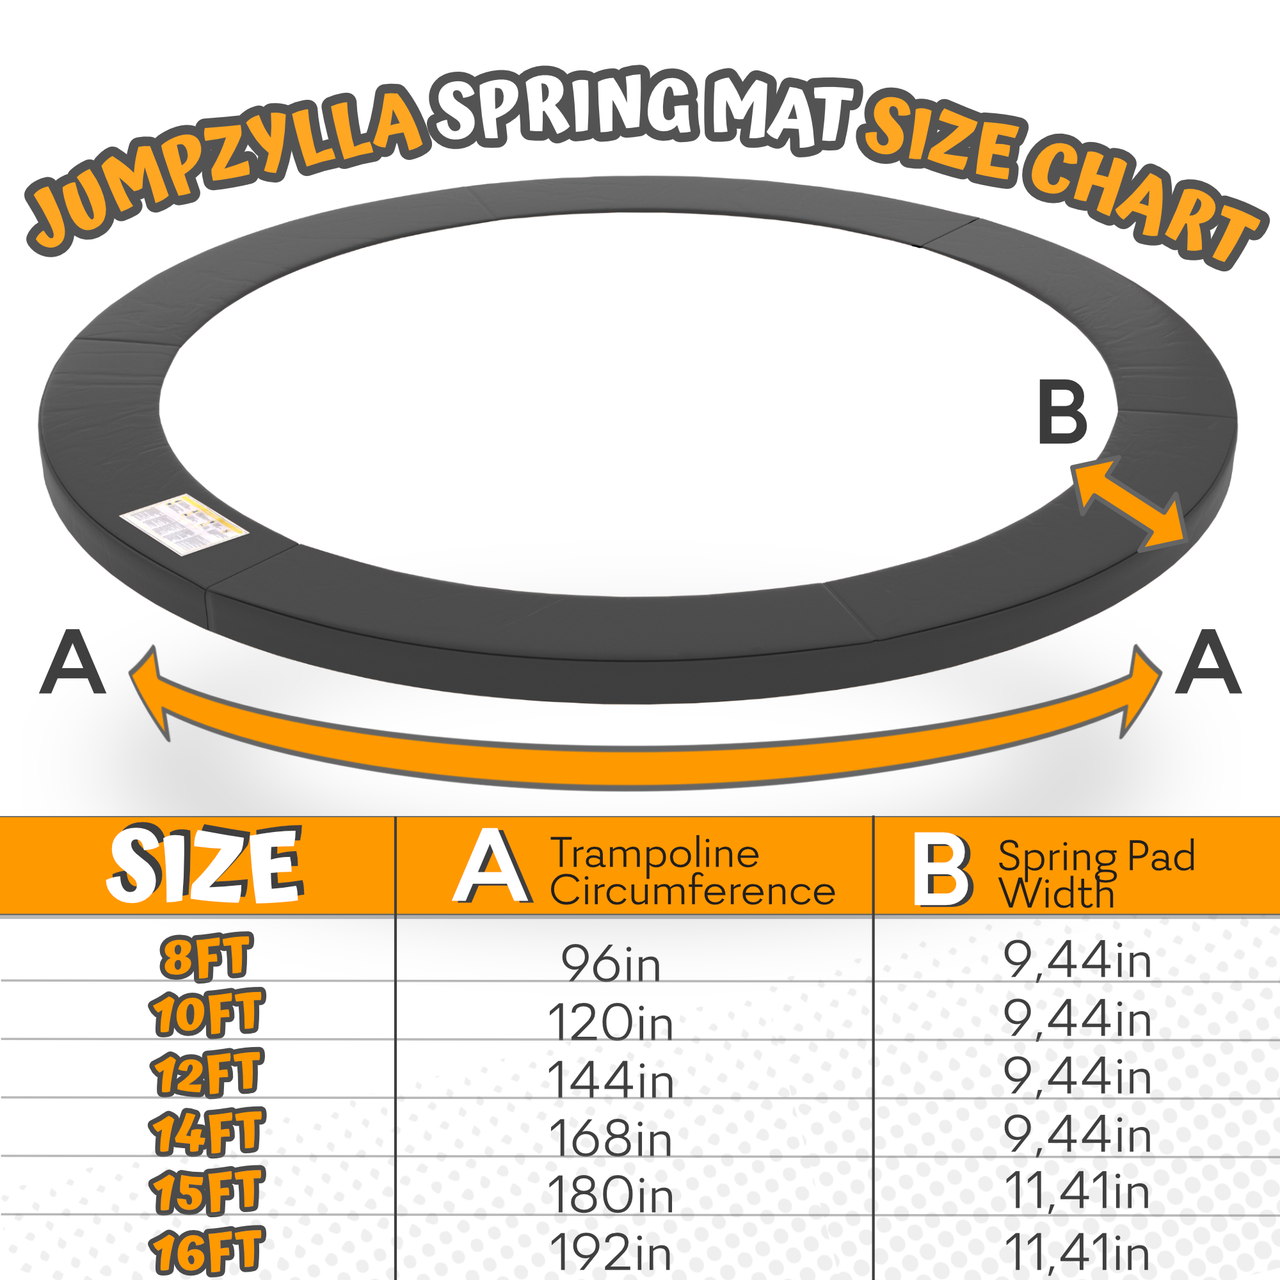 [NEW] Jumpzylla Double Sided Spring Cover Pads for 10FT Trampolines